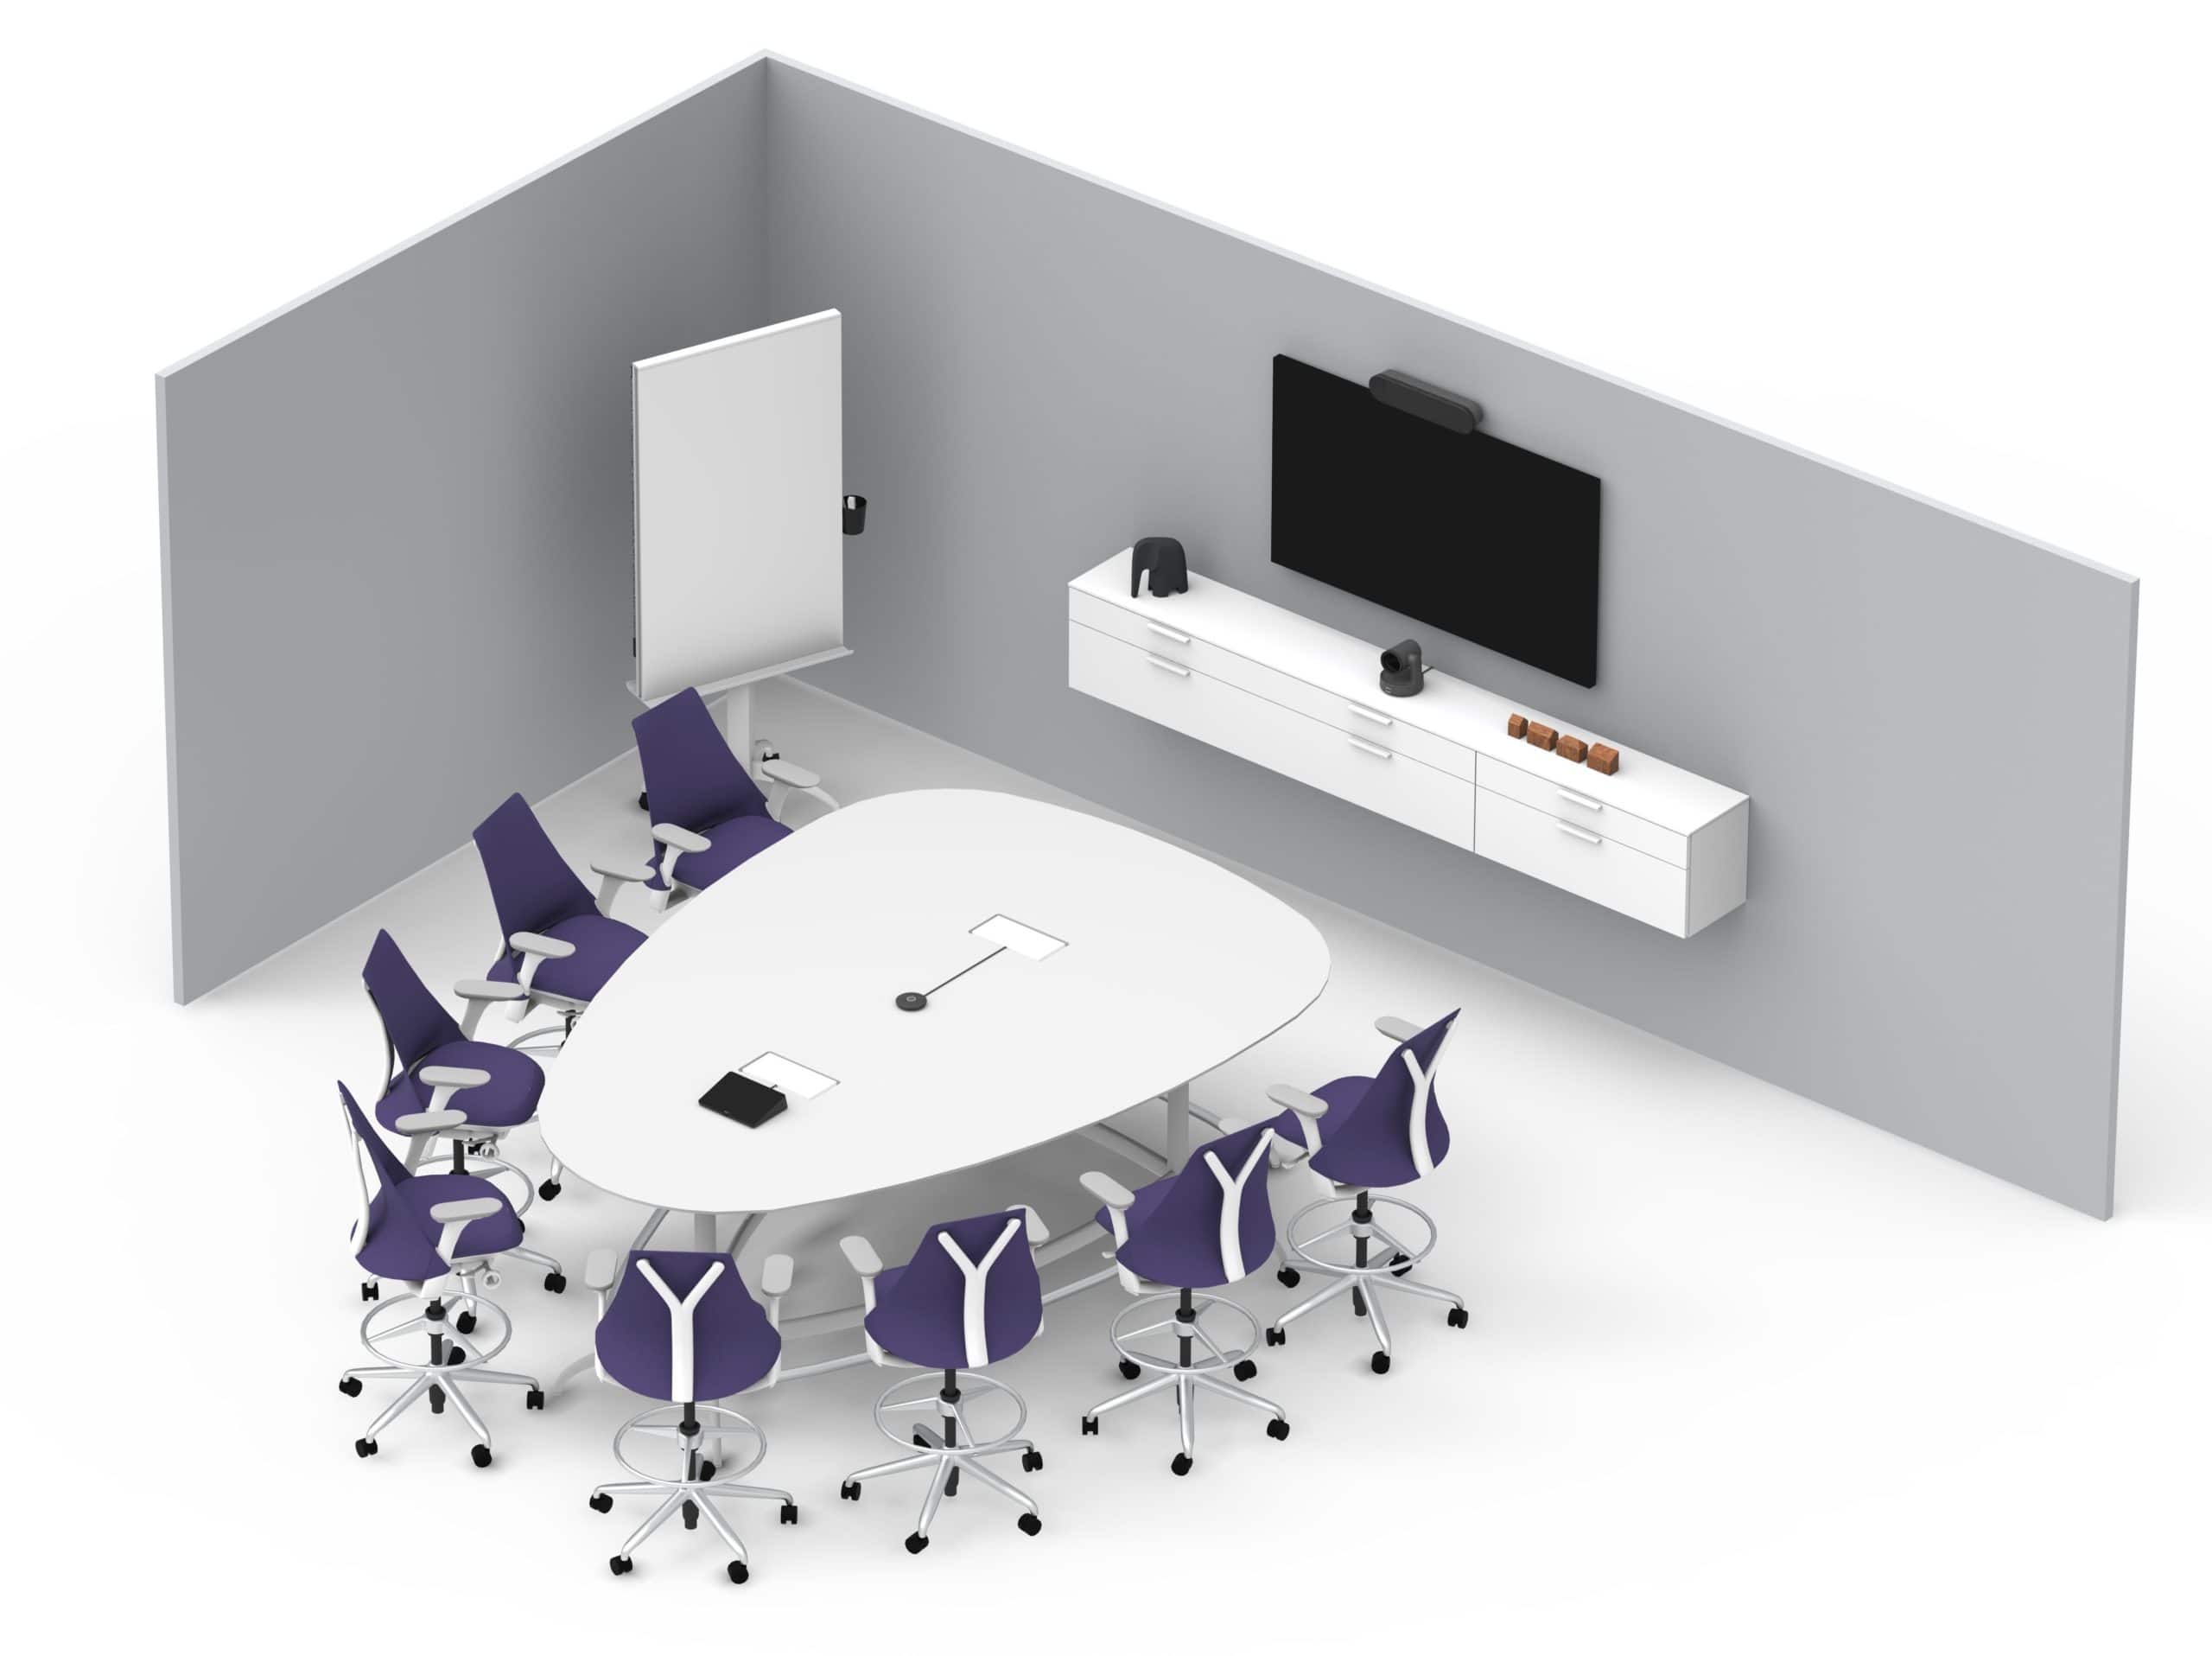 It's easy to deploy Microsoft Teams Rooms throughout the workplace.